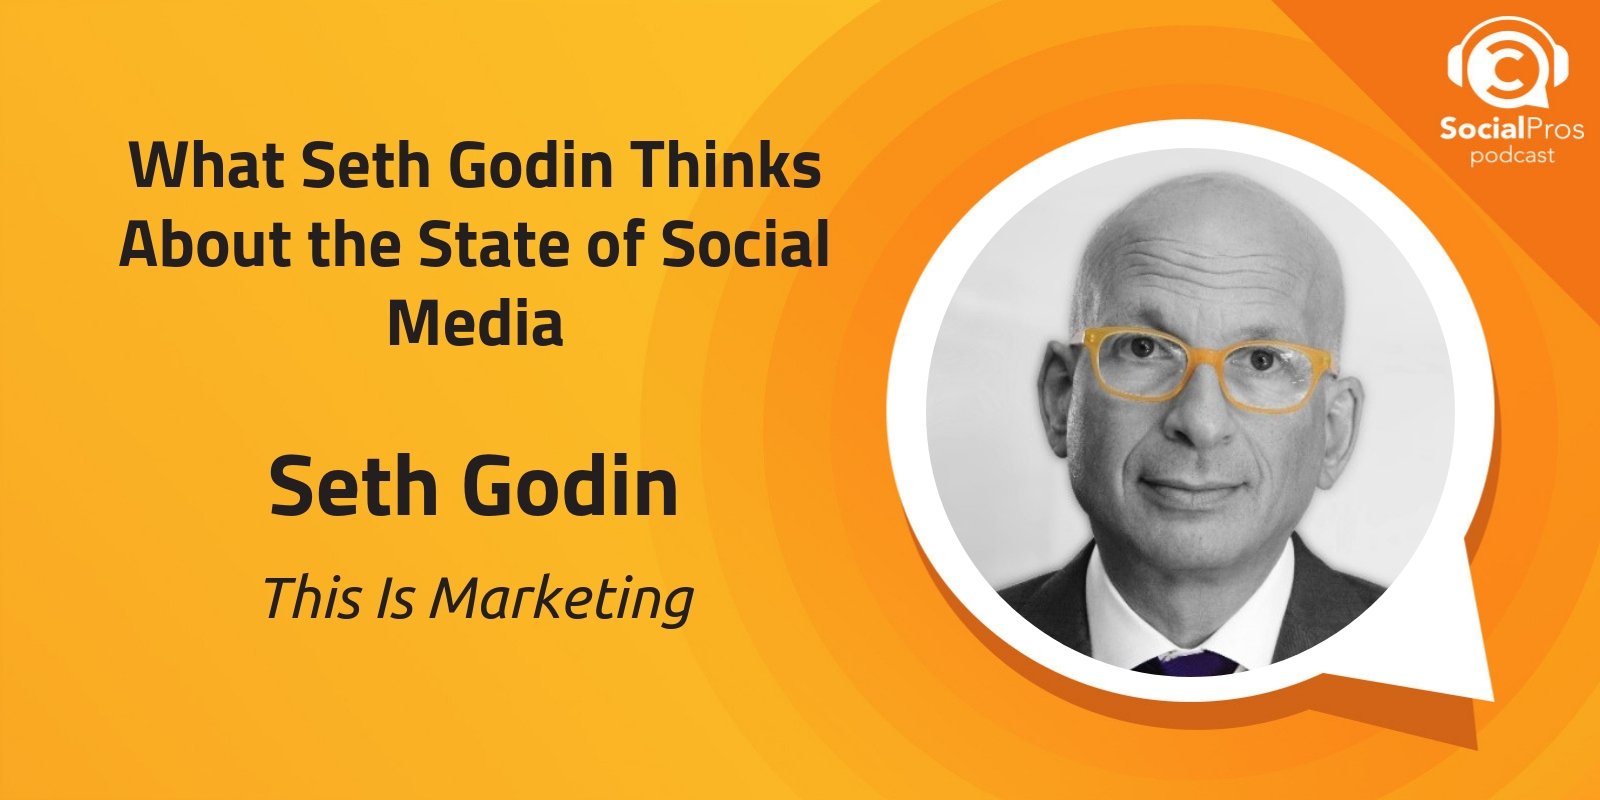 What Seth Godin Thinks About the State of Social Media